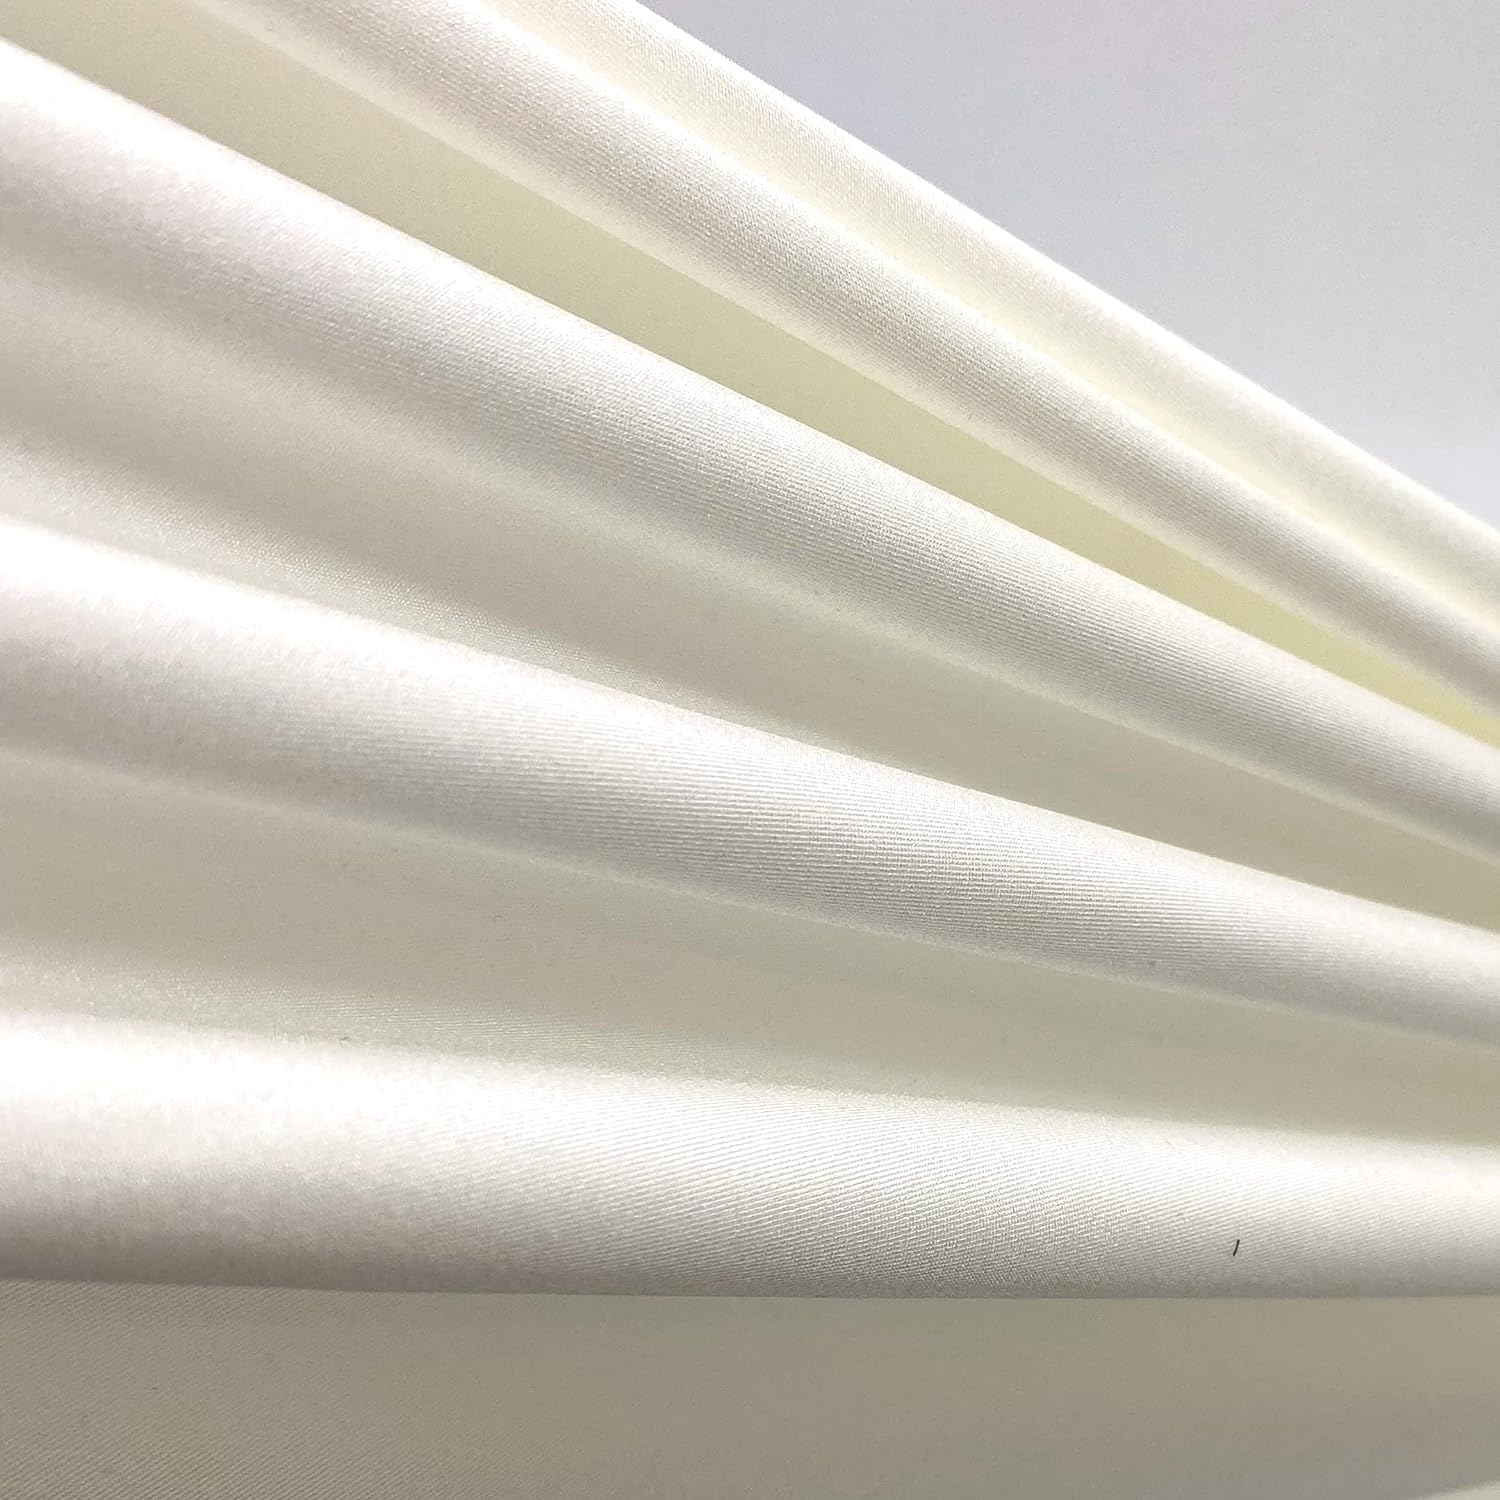 Off White Luxury Nylon Spandex Fabric By The YardICE FABRICSICE FABRICSBy The Yard (58" Width)Off White Luxury Nylon Spandex Fabric By The Yard ICE FABRICS